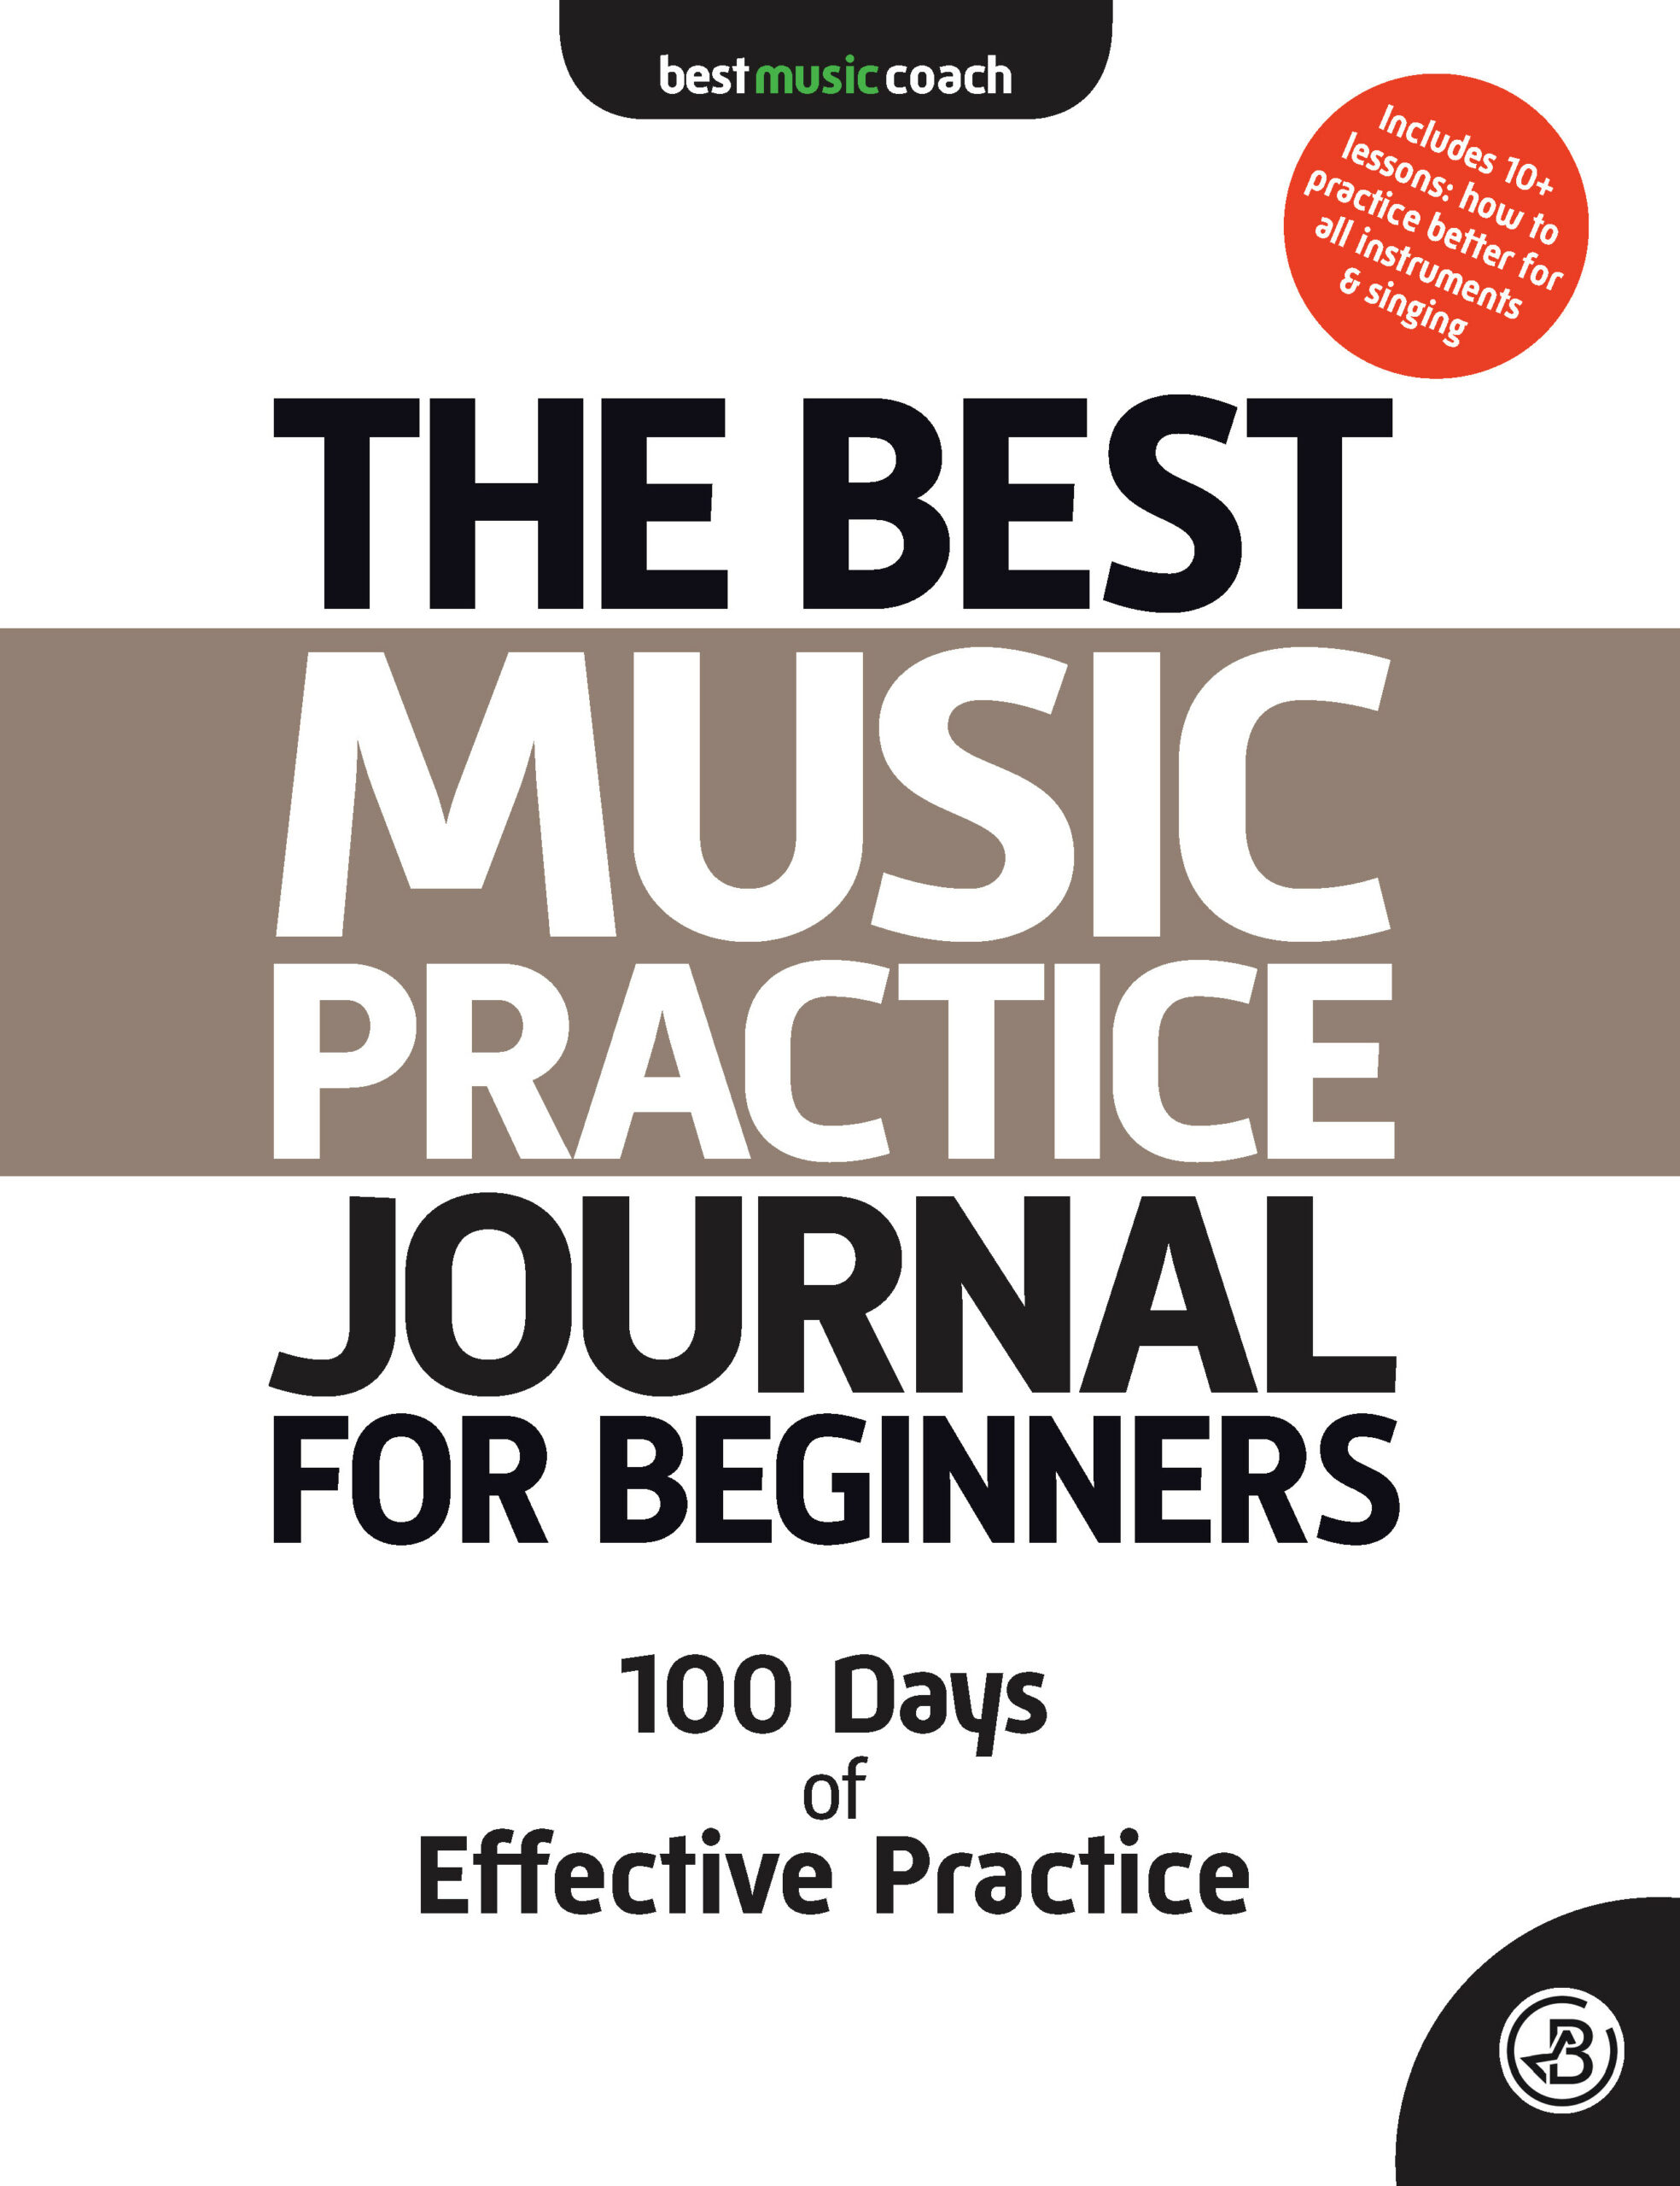 The Best Music Practice Journal for Beginners 100 Days of Effective Practice